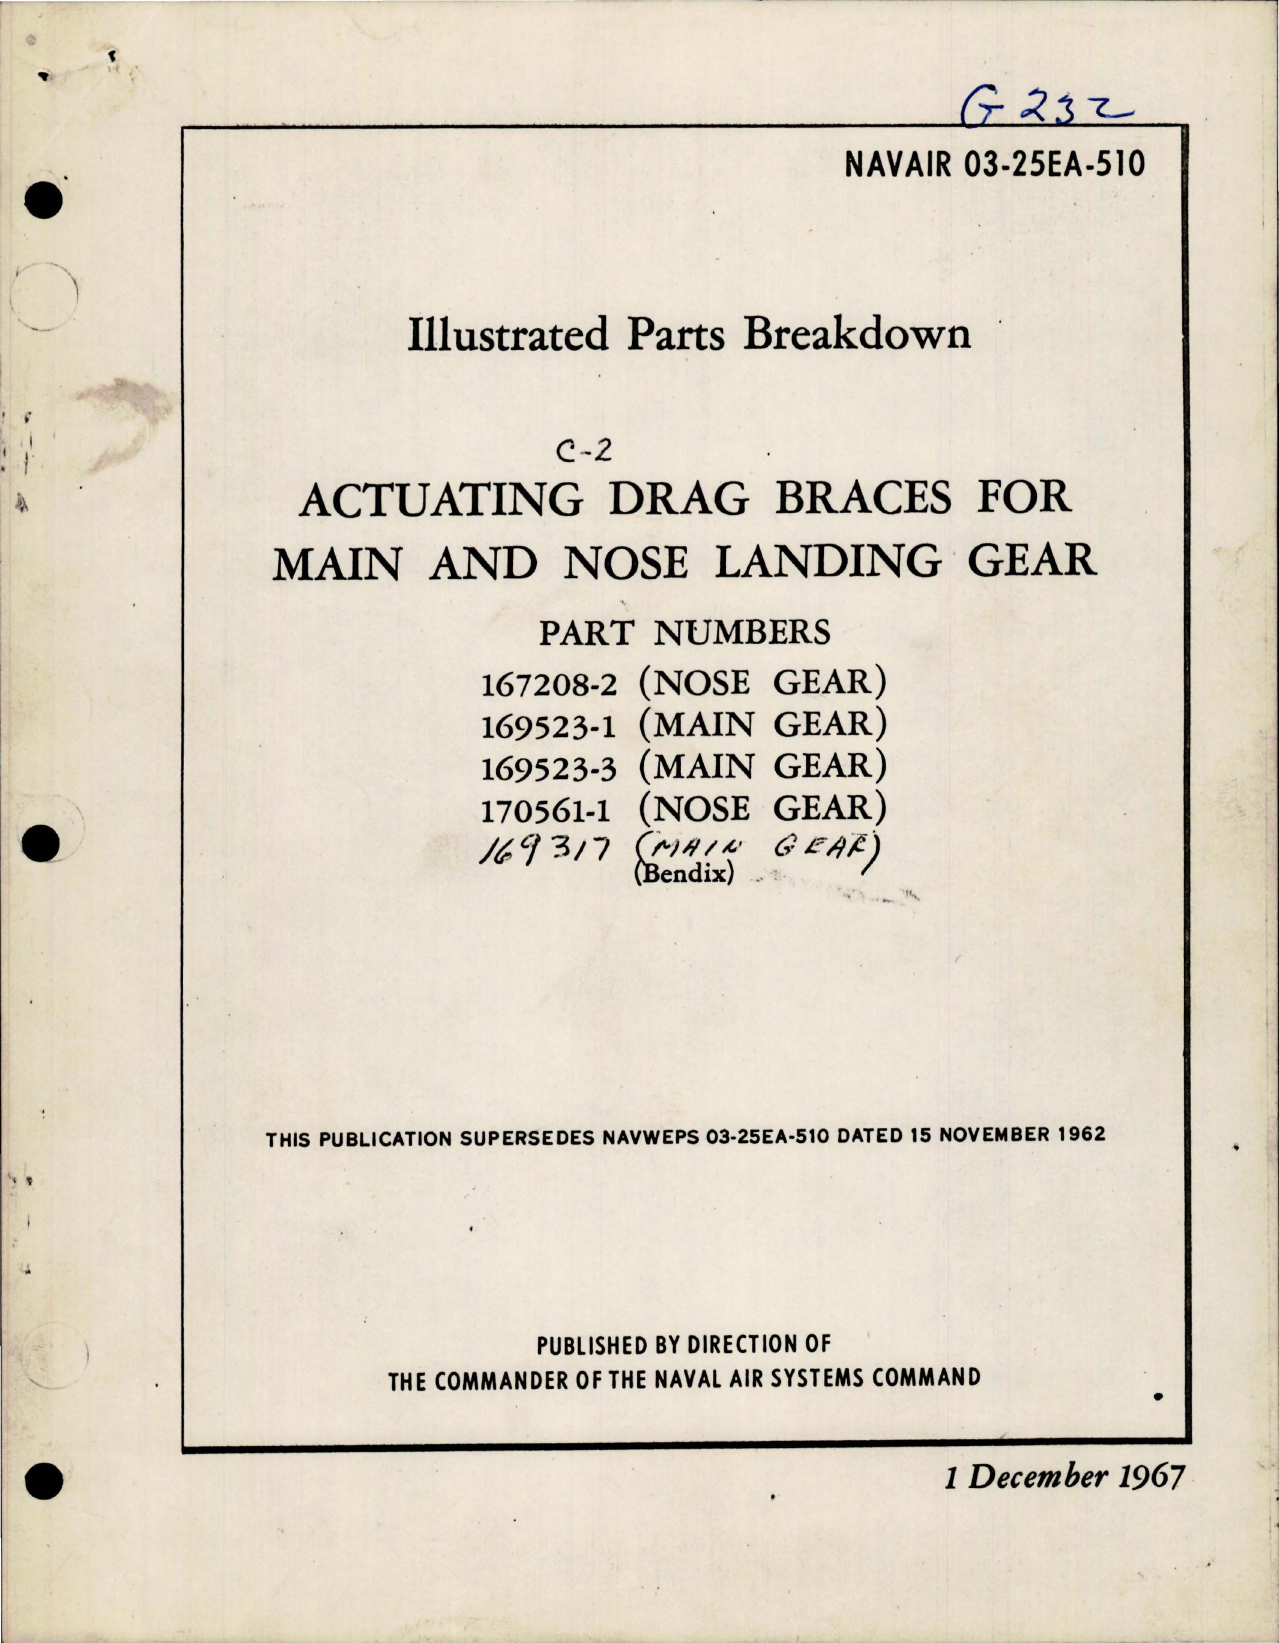 Sample page 1 from AirCorps Library document: Illustrated Parts Breakdown for Actuating Drag Braces for Main and Nose Landing Gear 